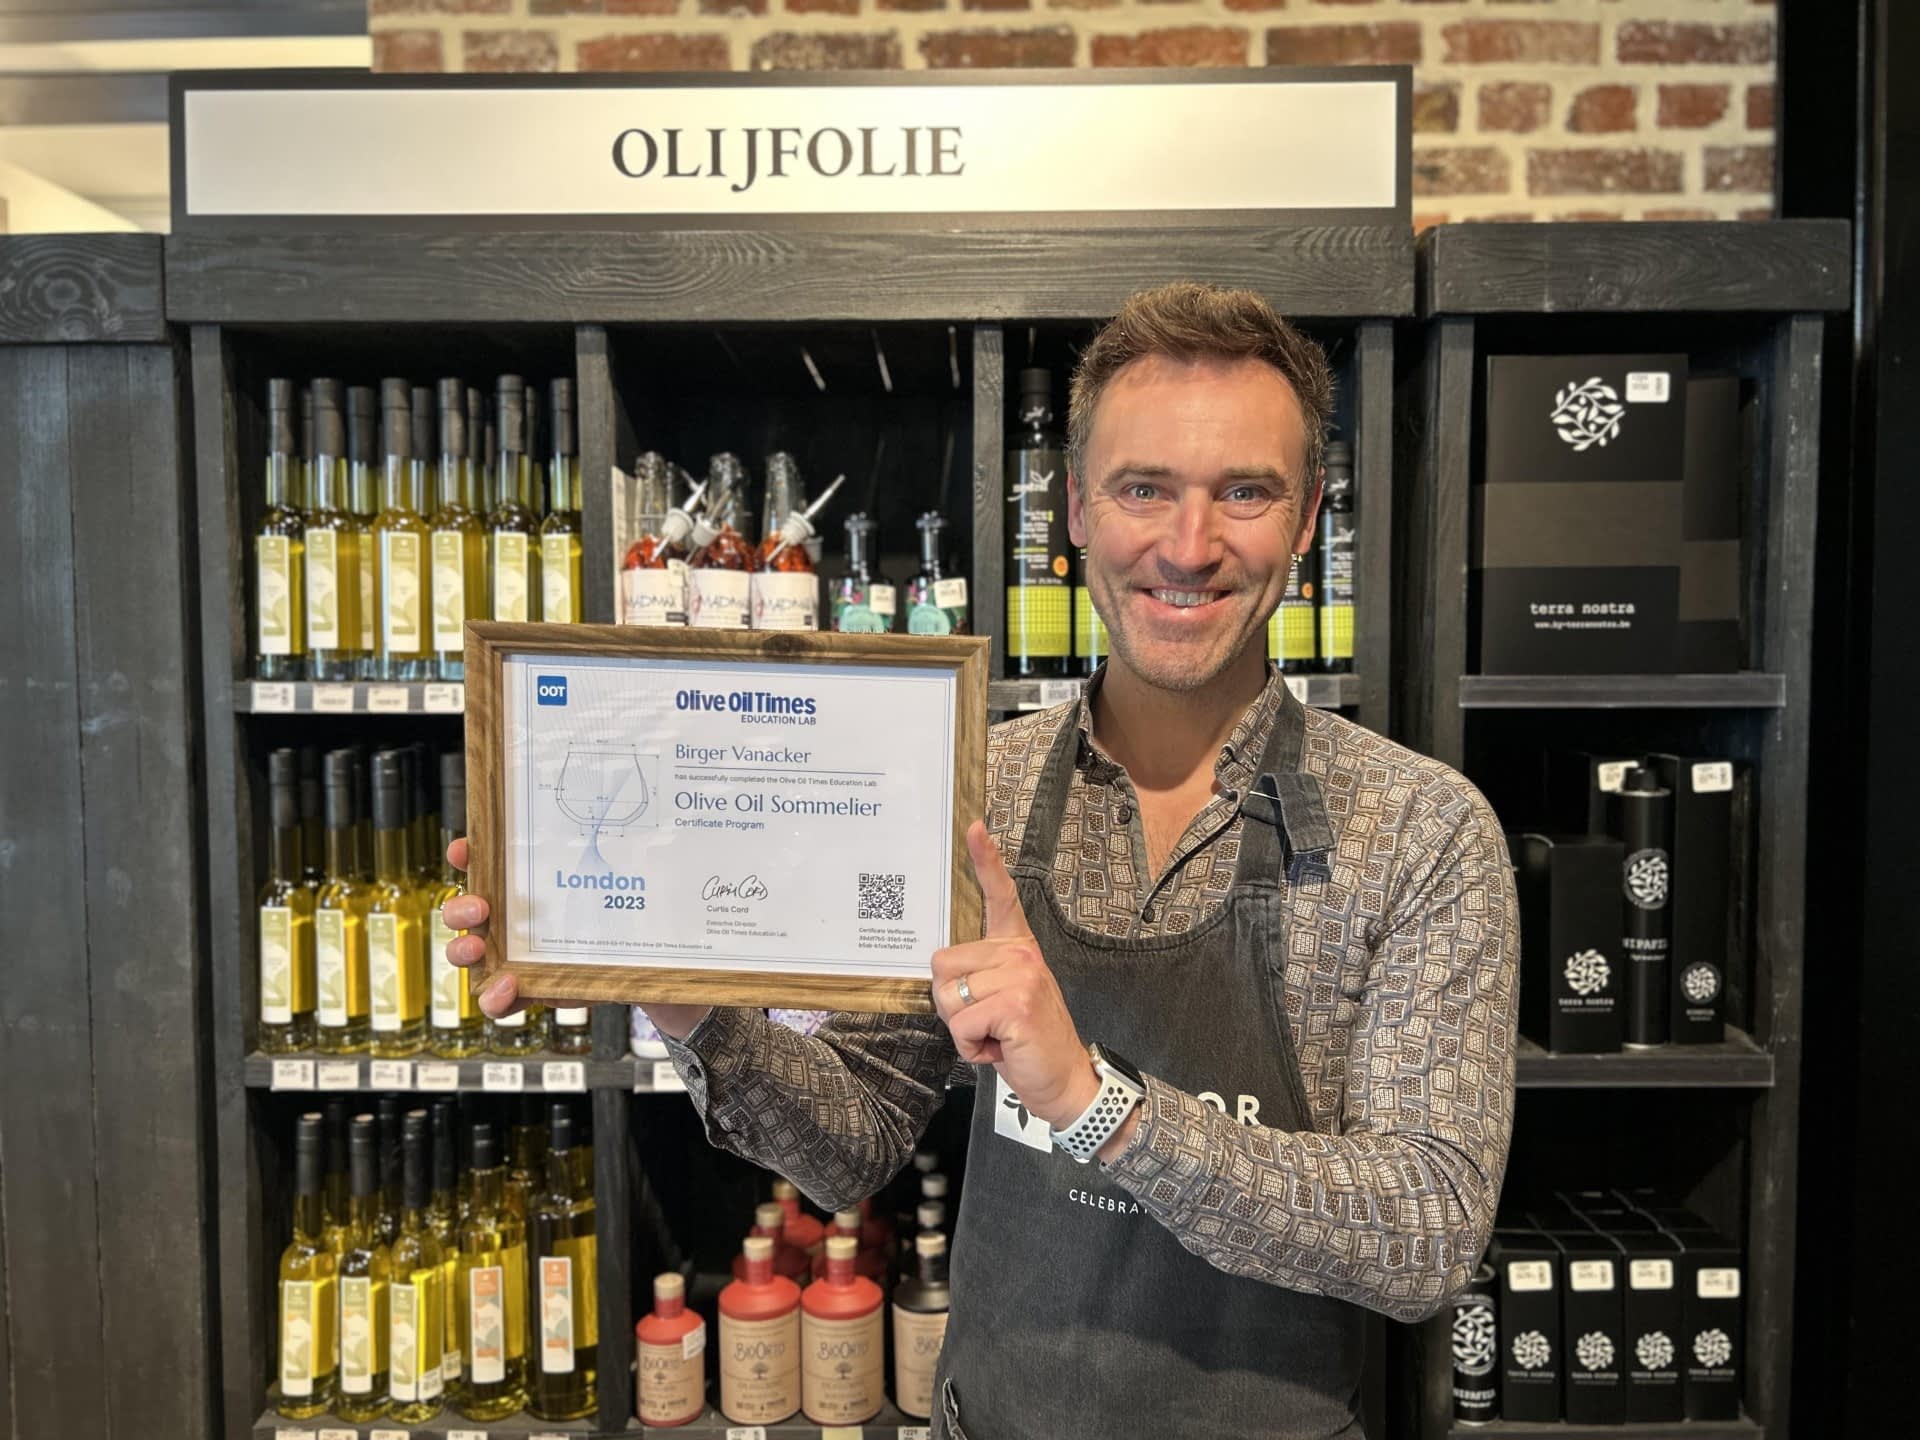 europe-cooking-with-olive-oil-tasting-olive-oil-31-complete-sommelier-certification-course-in-london-olive-oil-times